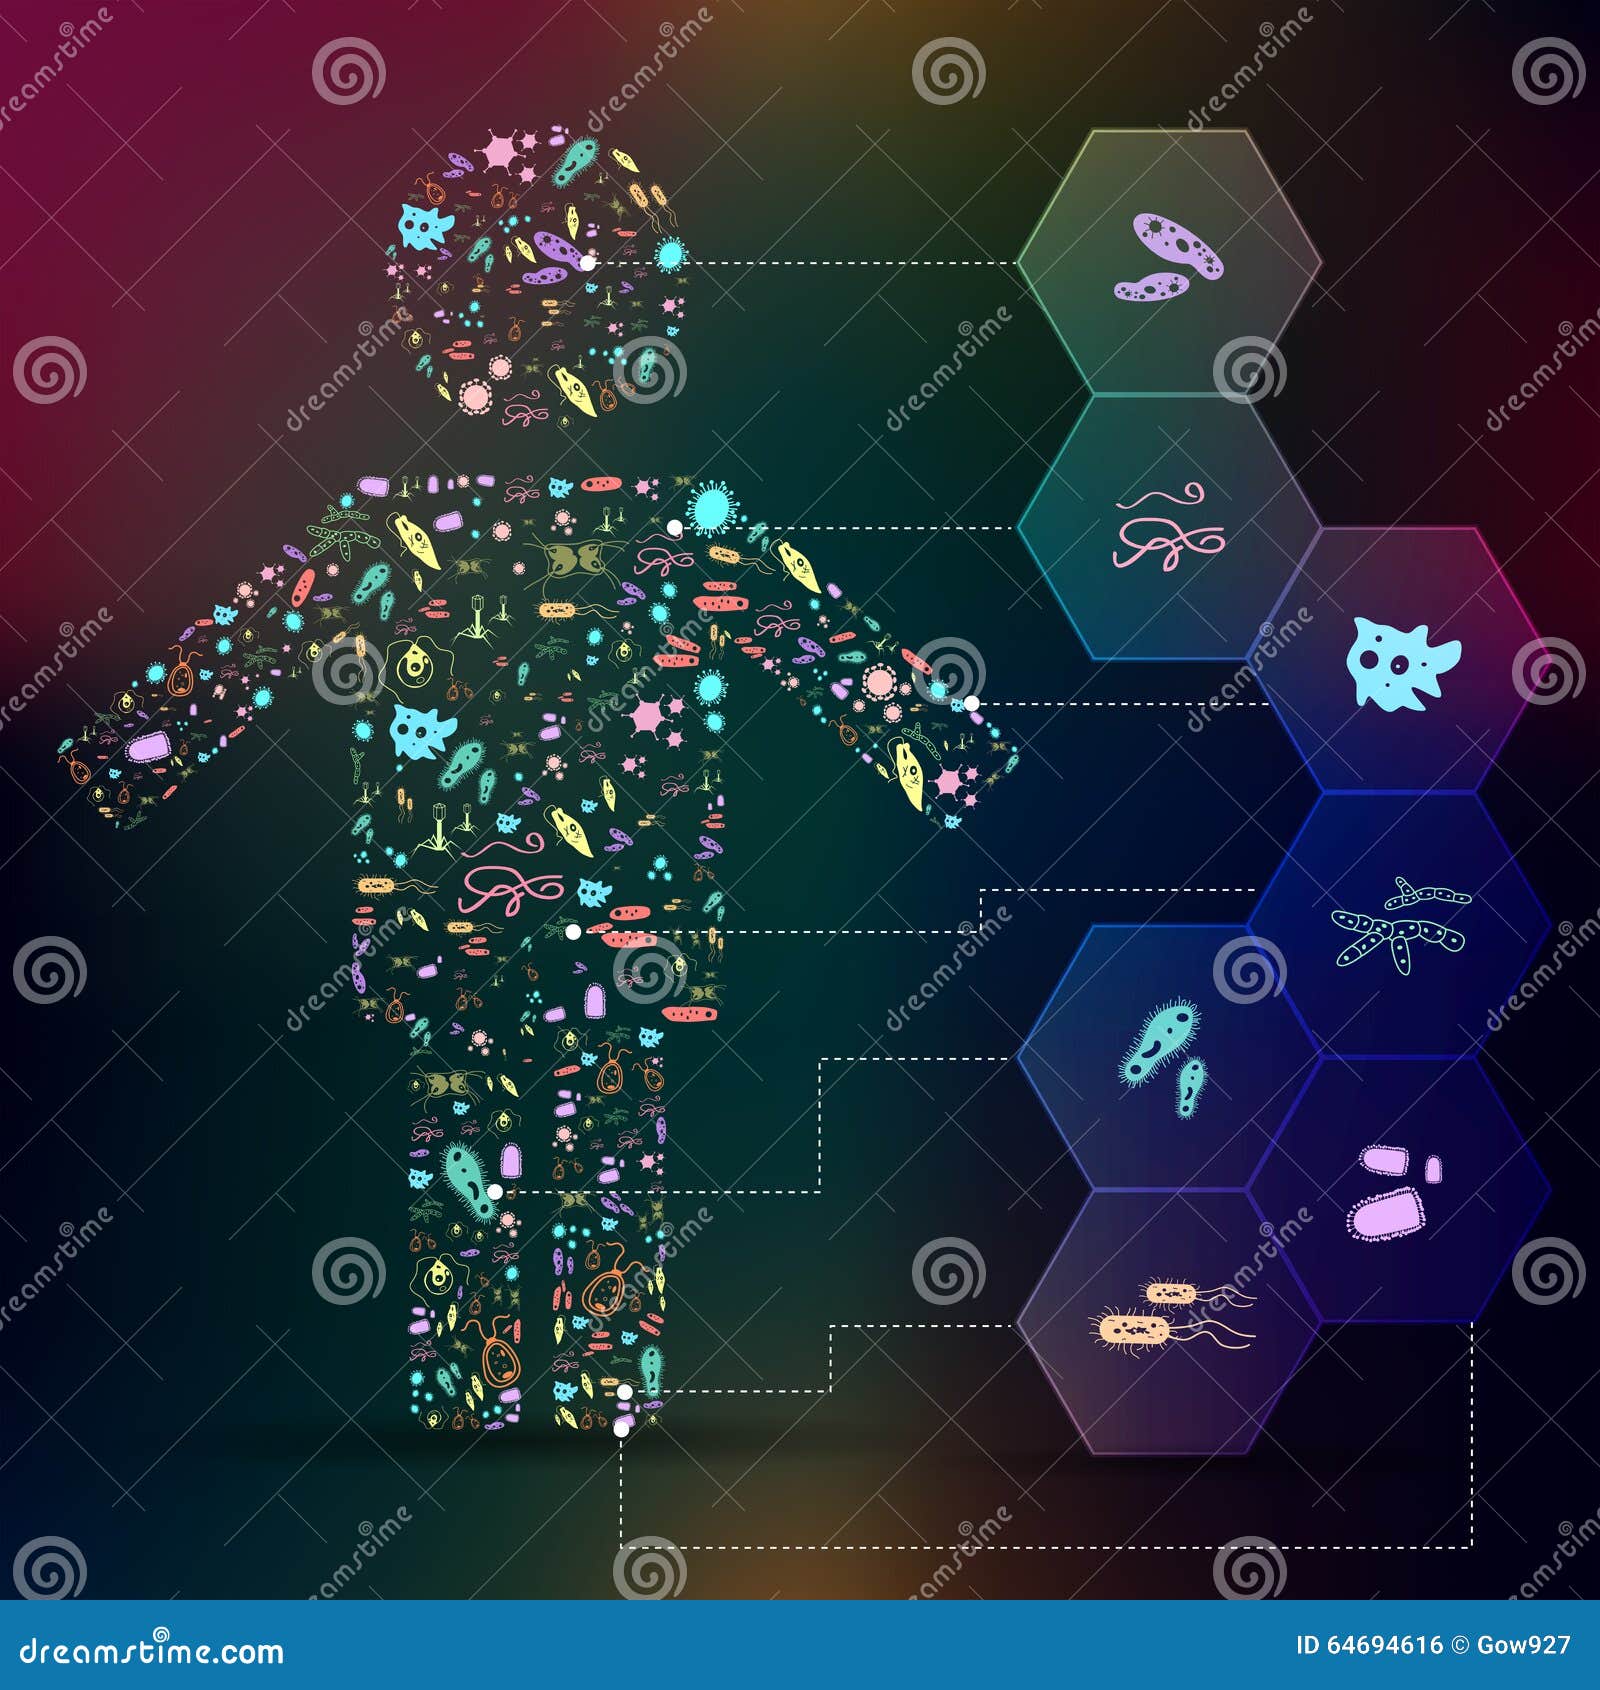 germ and pathogen icon in human  infographic background